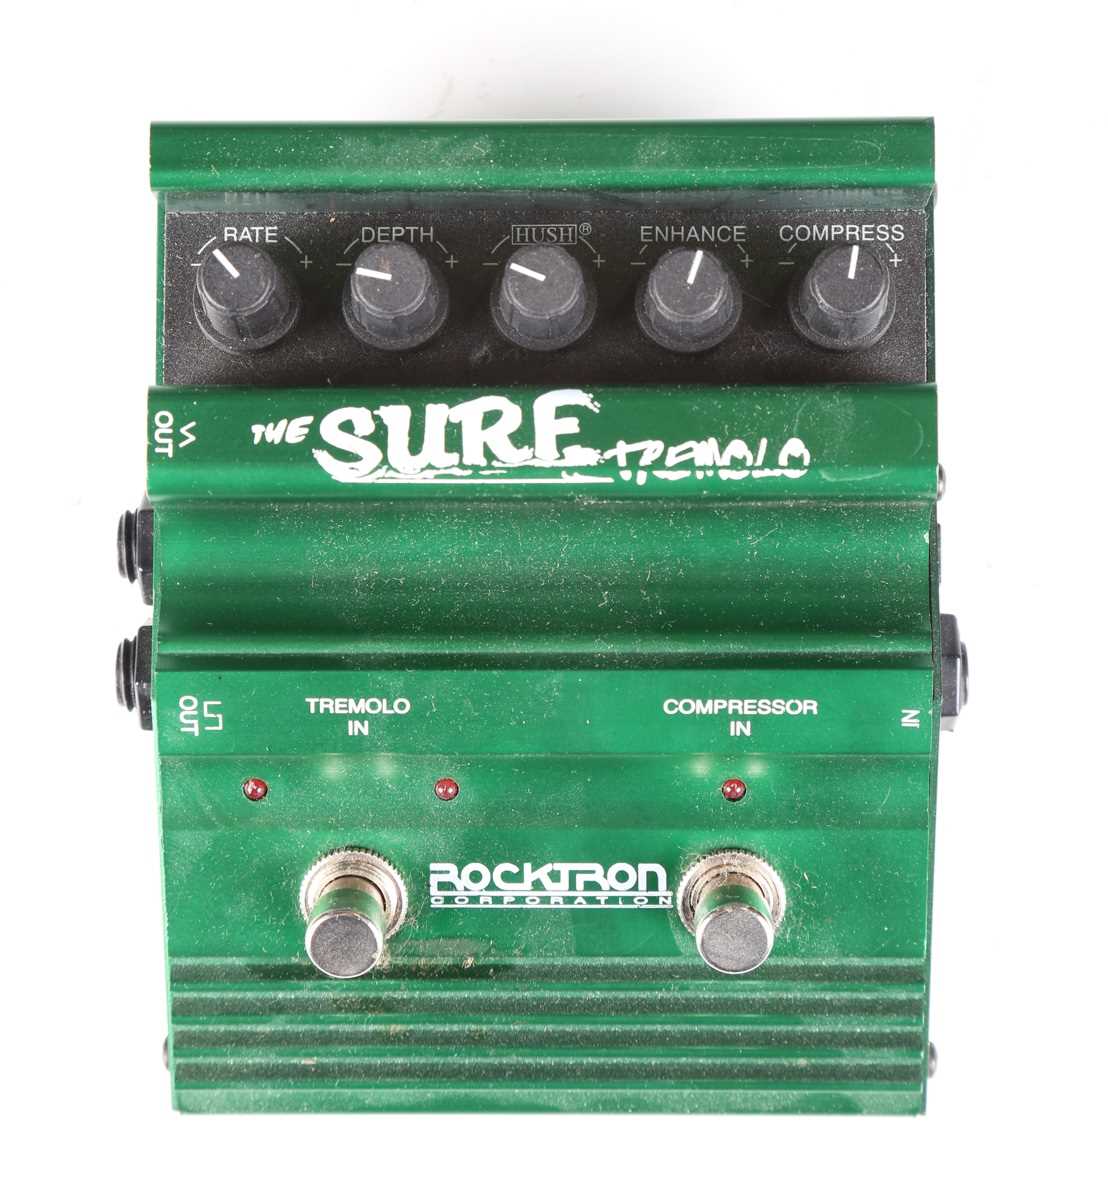 A Tube Works Pure Tube 303 guitar effects pedal, a Rocktron Sure Tremolo, a Line 6 DL4 Delay - Image 10 of 13